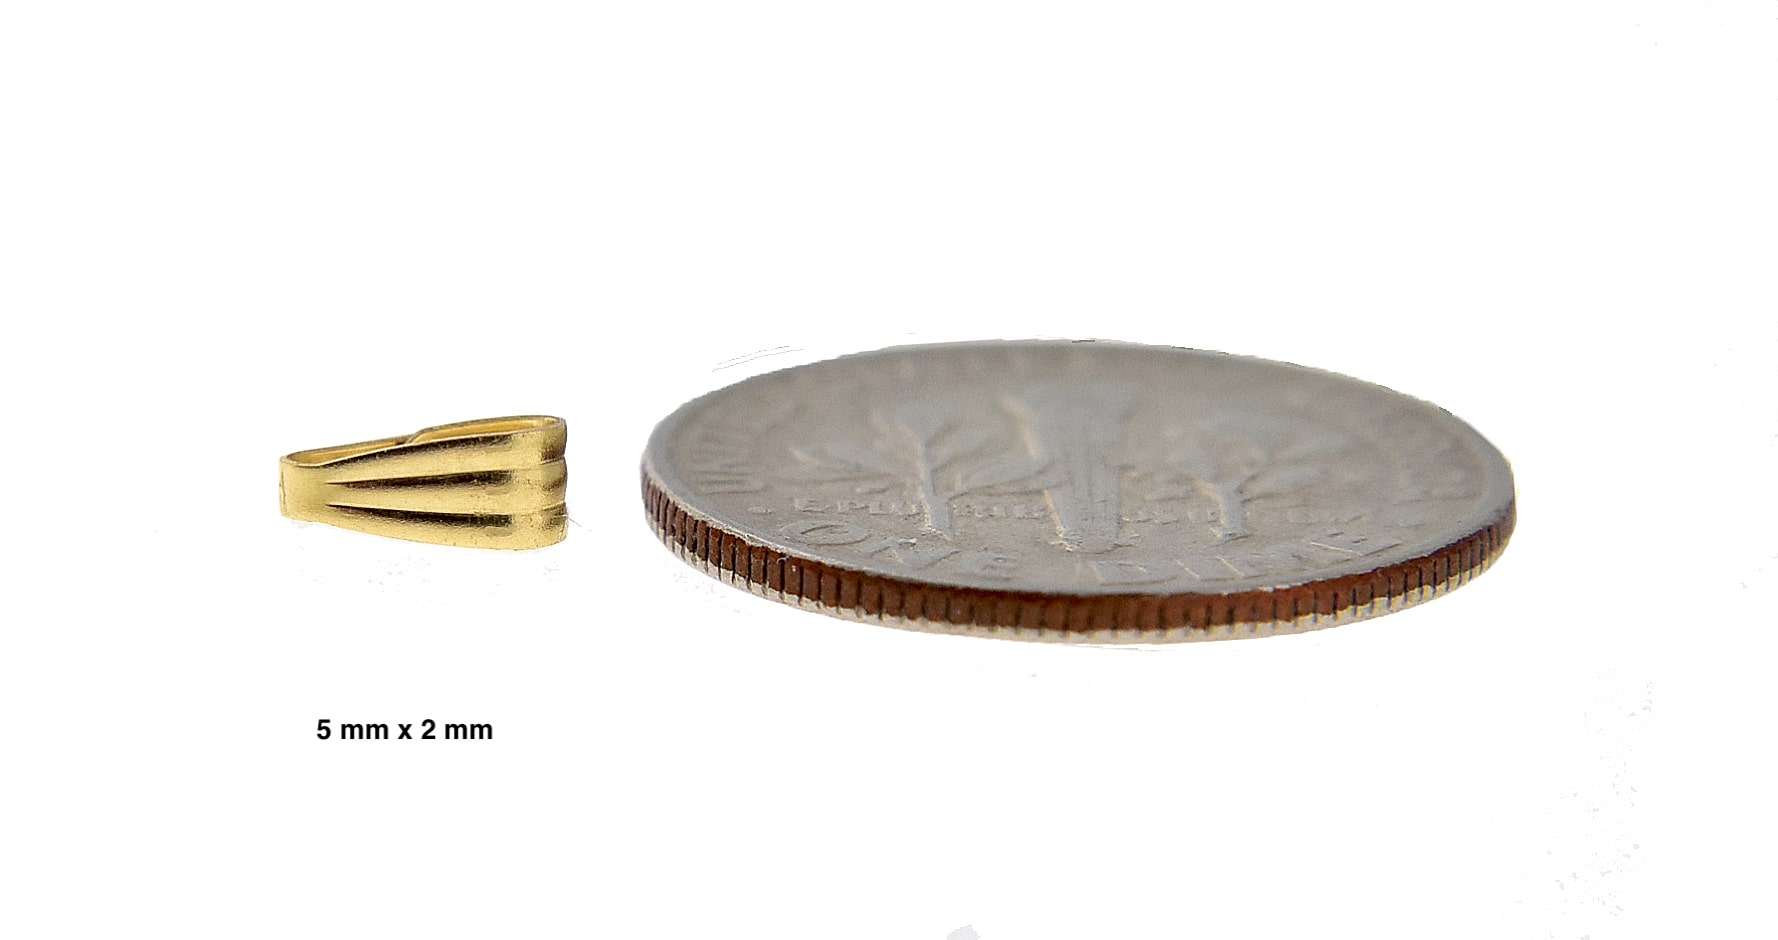 14k Yellow Gold or 14k White Gold 5mm x 2mm Bail ID Snap On Tapered Locket Bail for Pendant Charm Jewelry Findings